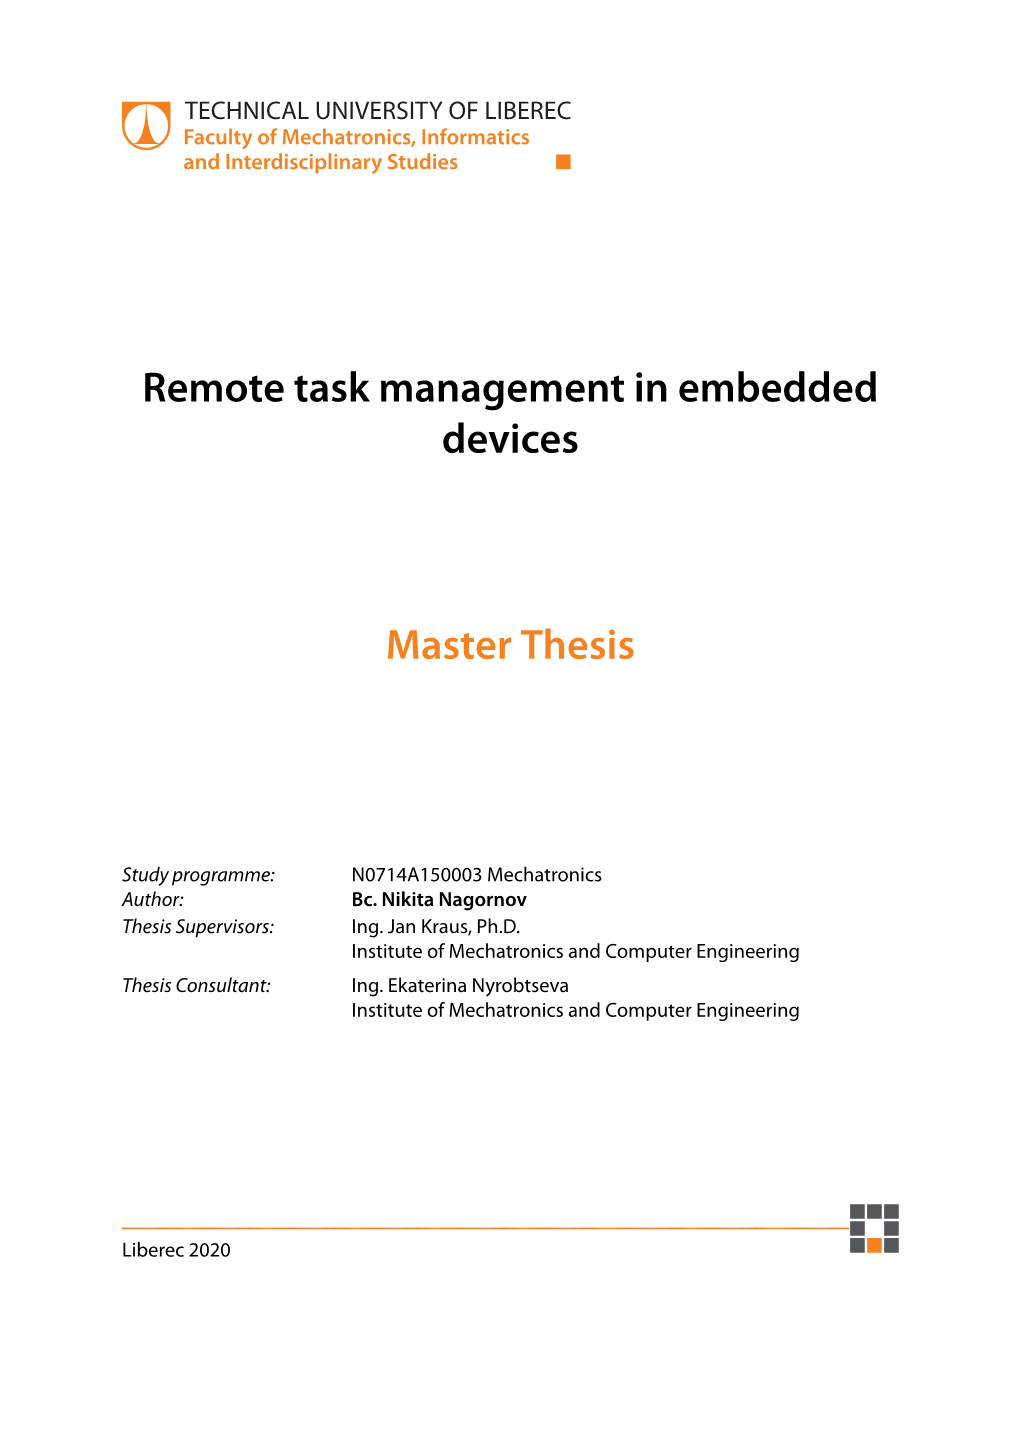 Remote Task Management in Embedded Devices